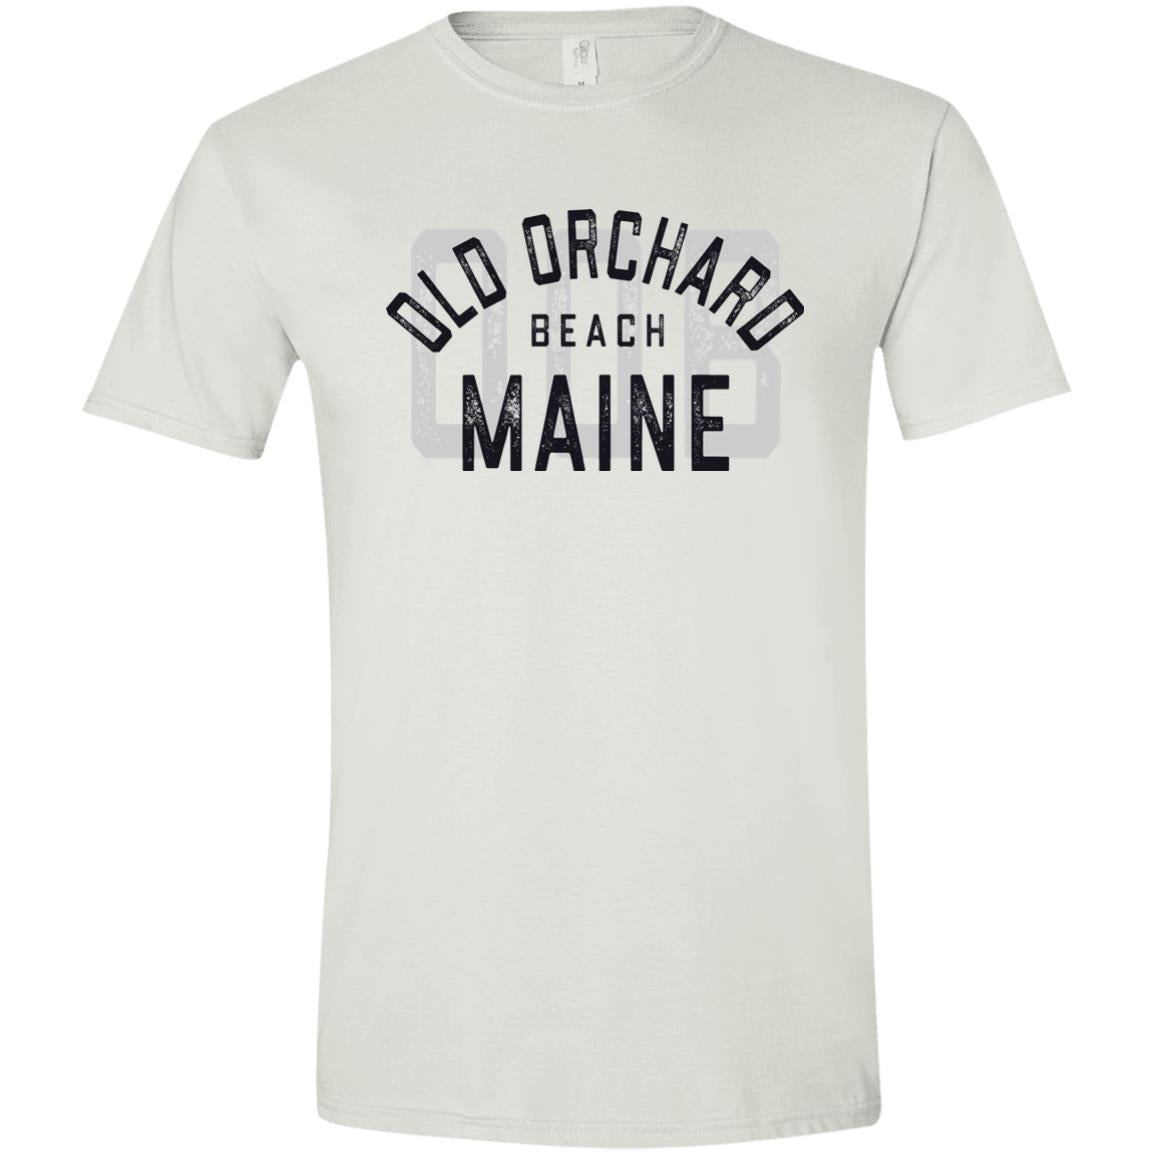 Vintage Maine, Retro Old Orchard Beach Shirt - Distressed Comfy Soft T-Shirt (Unisex Tee) - 207 Threads